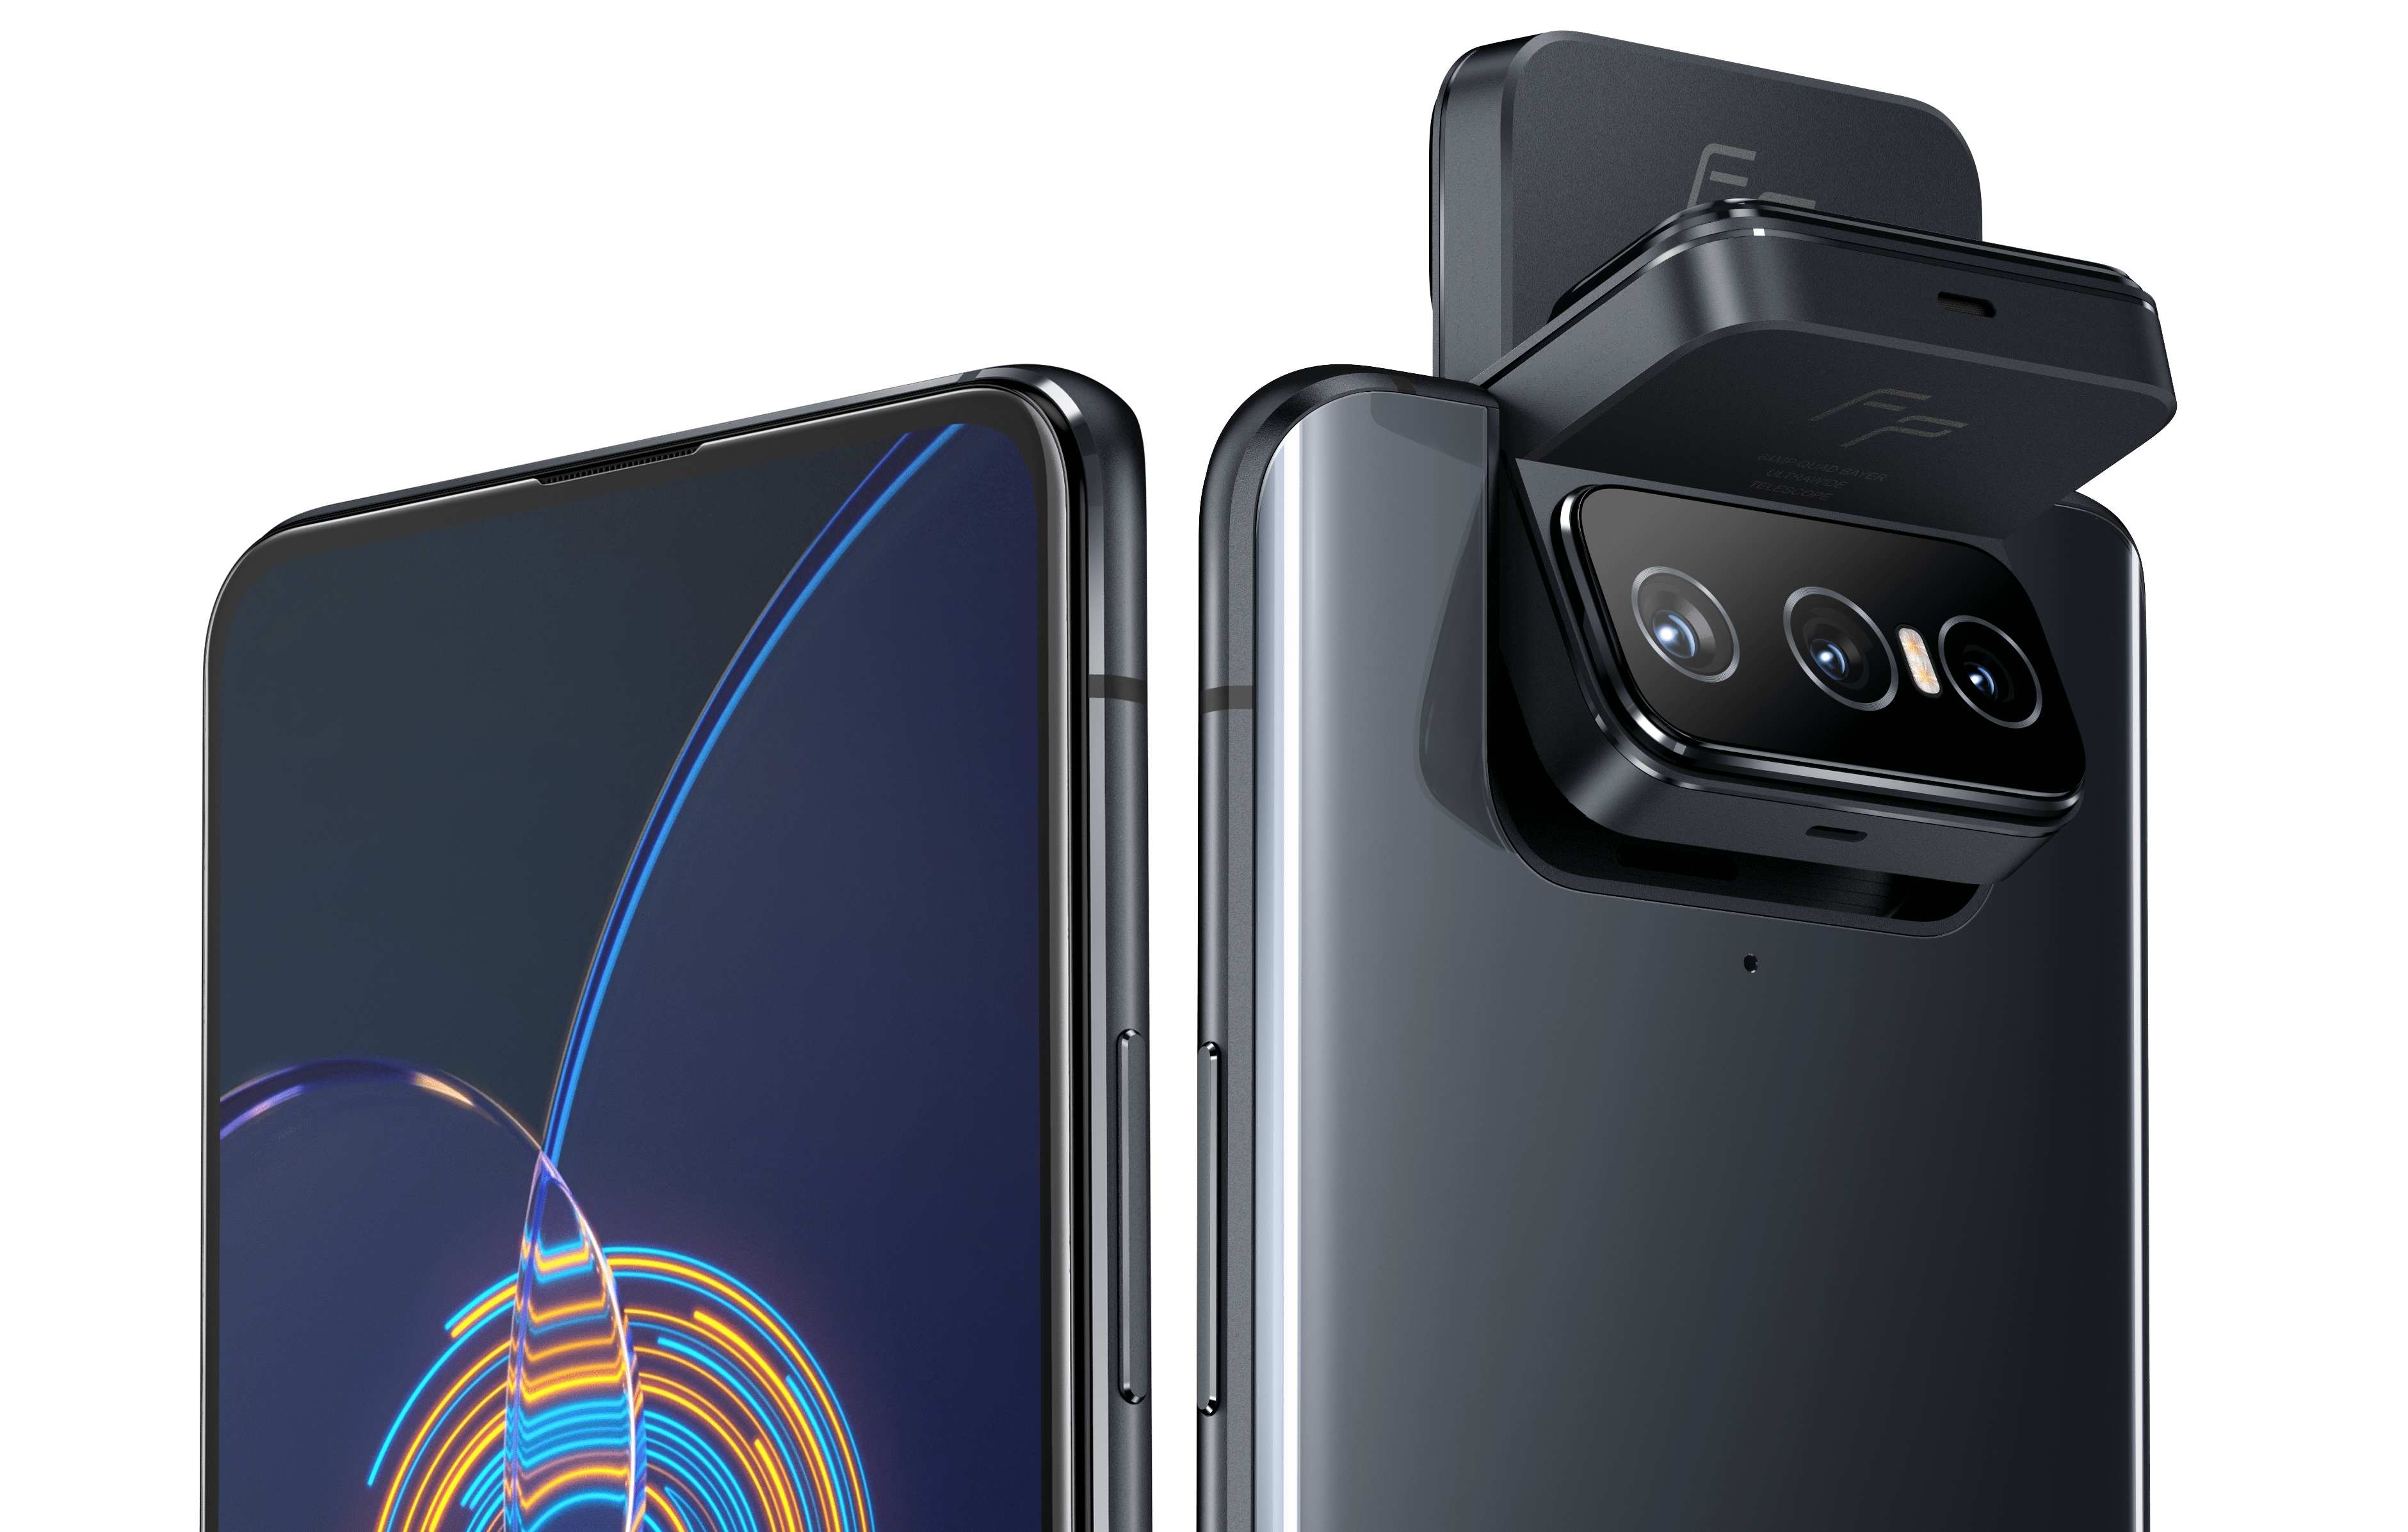 ASUS introduces the Zenfone 8 series smartphones in Malaysia 